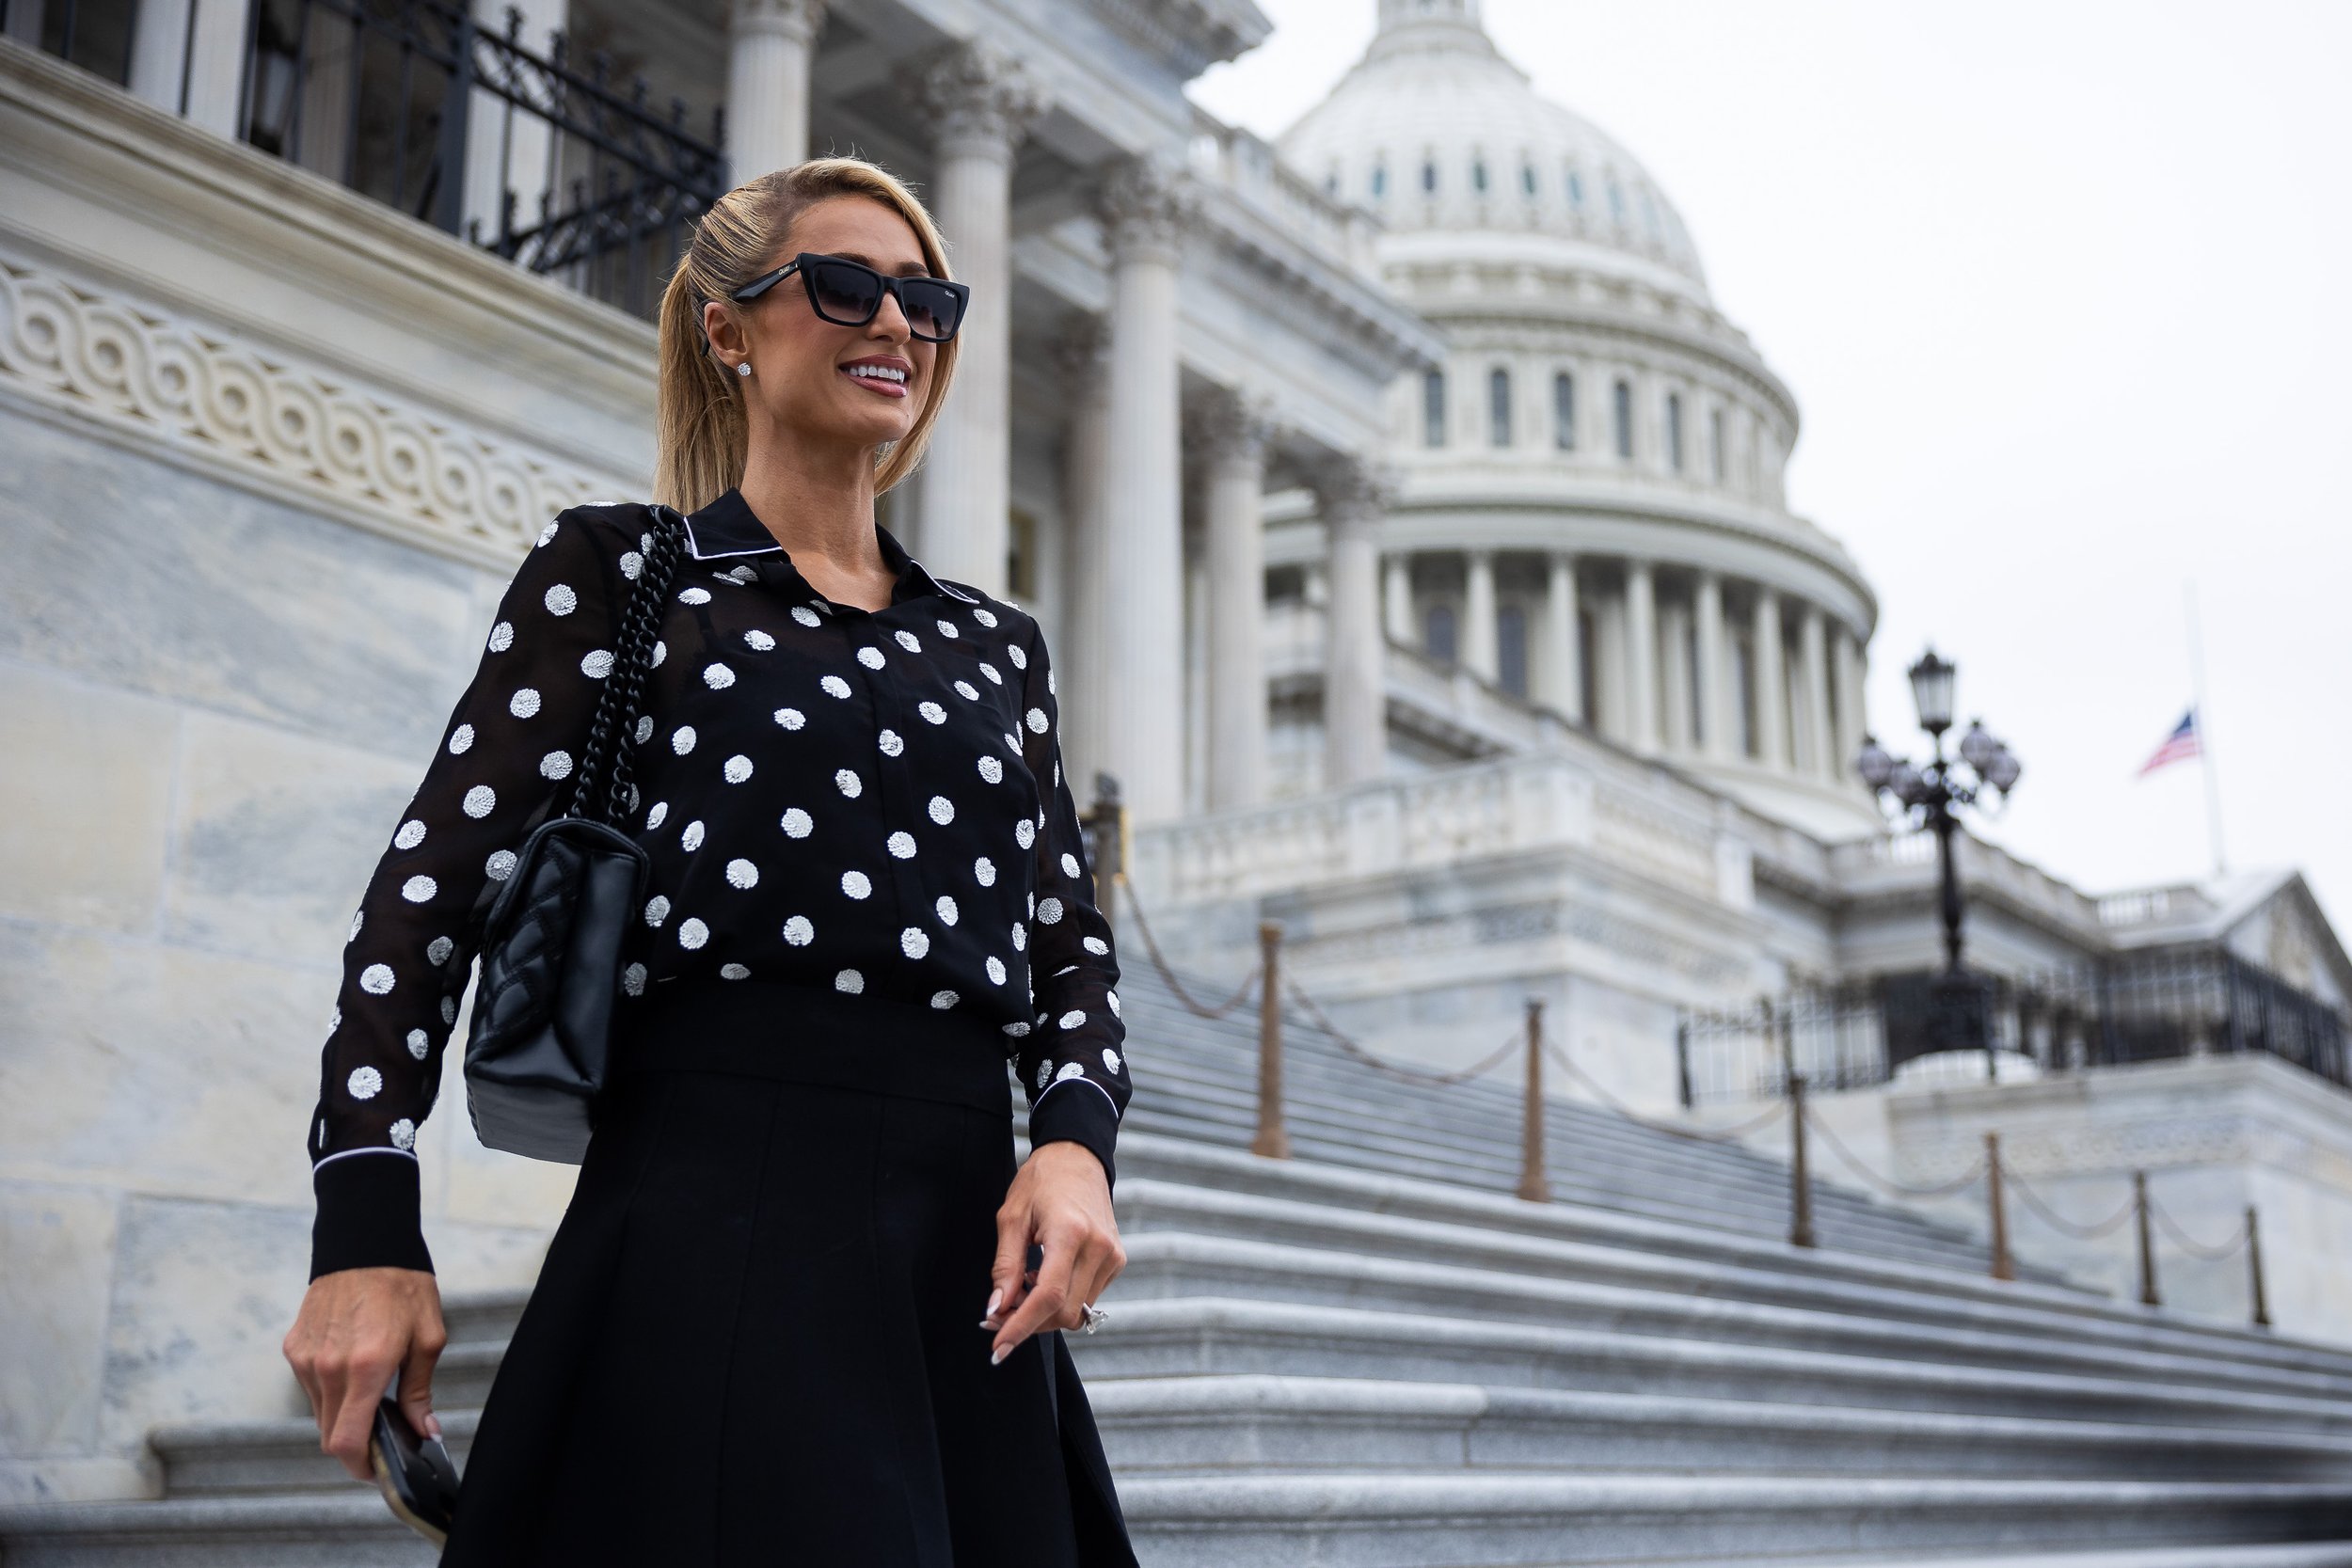  Paris Hilton stands outside the U.S. Capitol as she continues her advocacy against child abuse May 13, 2022.  